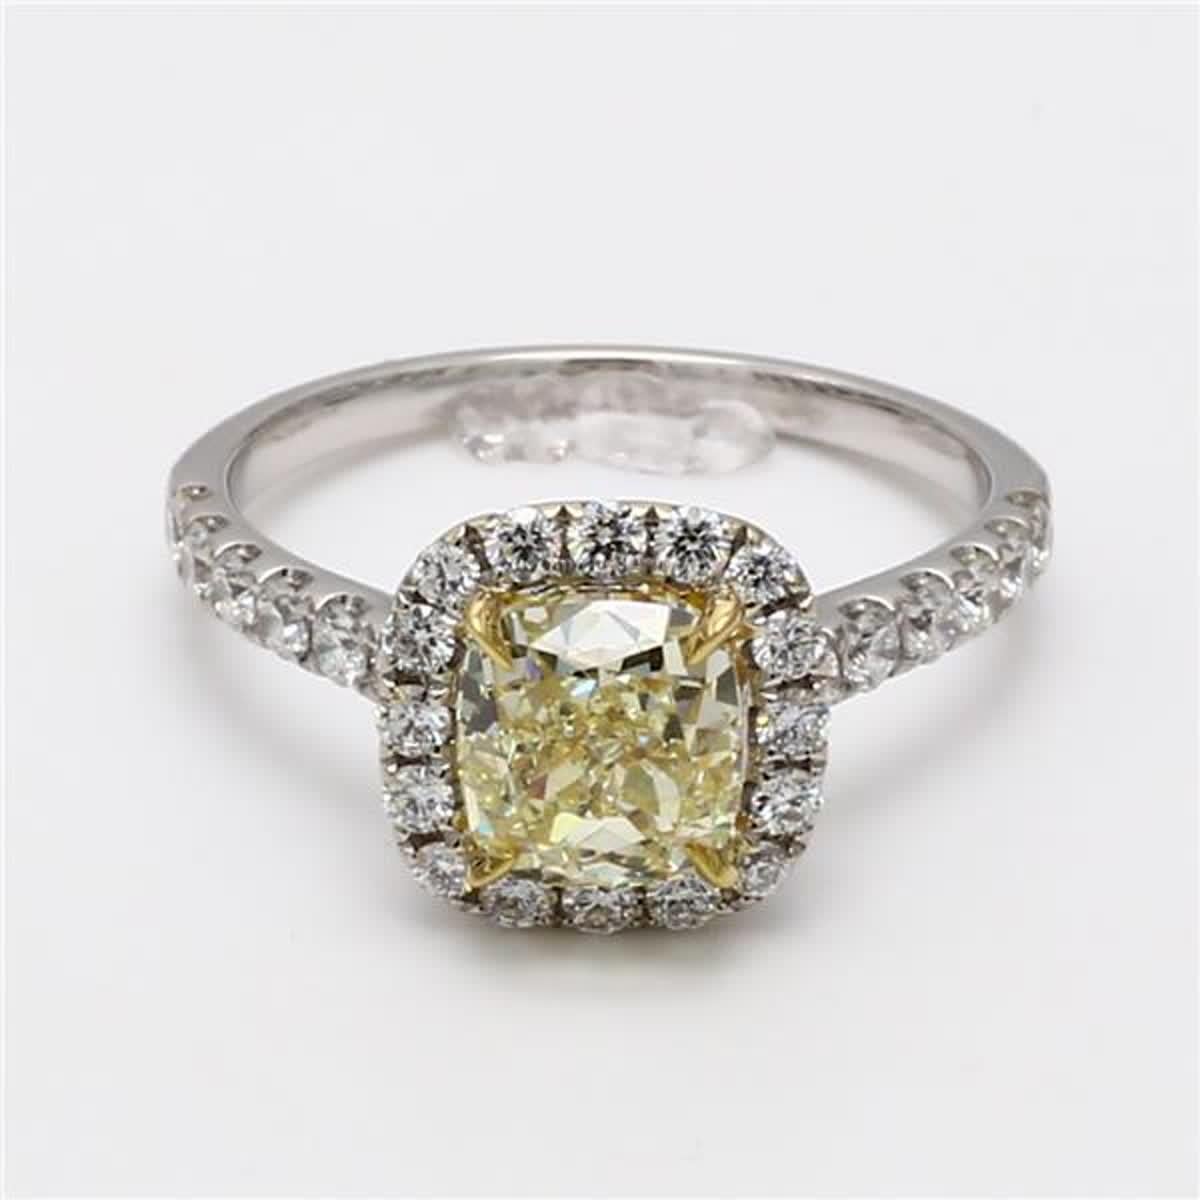 RareGemWorld's classic GIA certified diamond ring. Mounted in a beautiful 18K Yellow and White Gold setting with a natural cushion cut yellow diamond. The yellow diamond is surrounded by round natural white diamond melee. This ring is guaranteed to